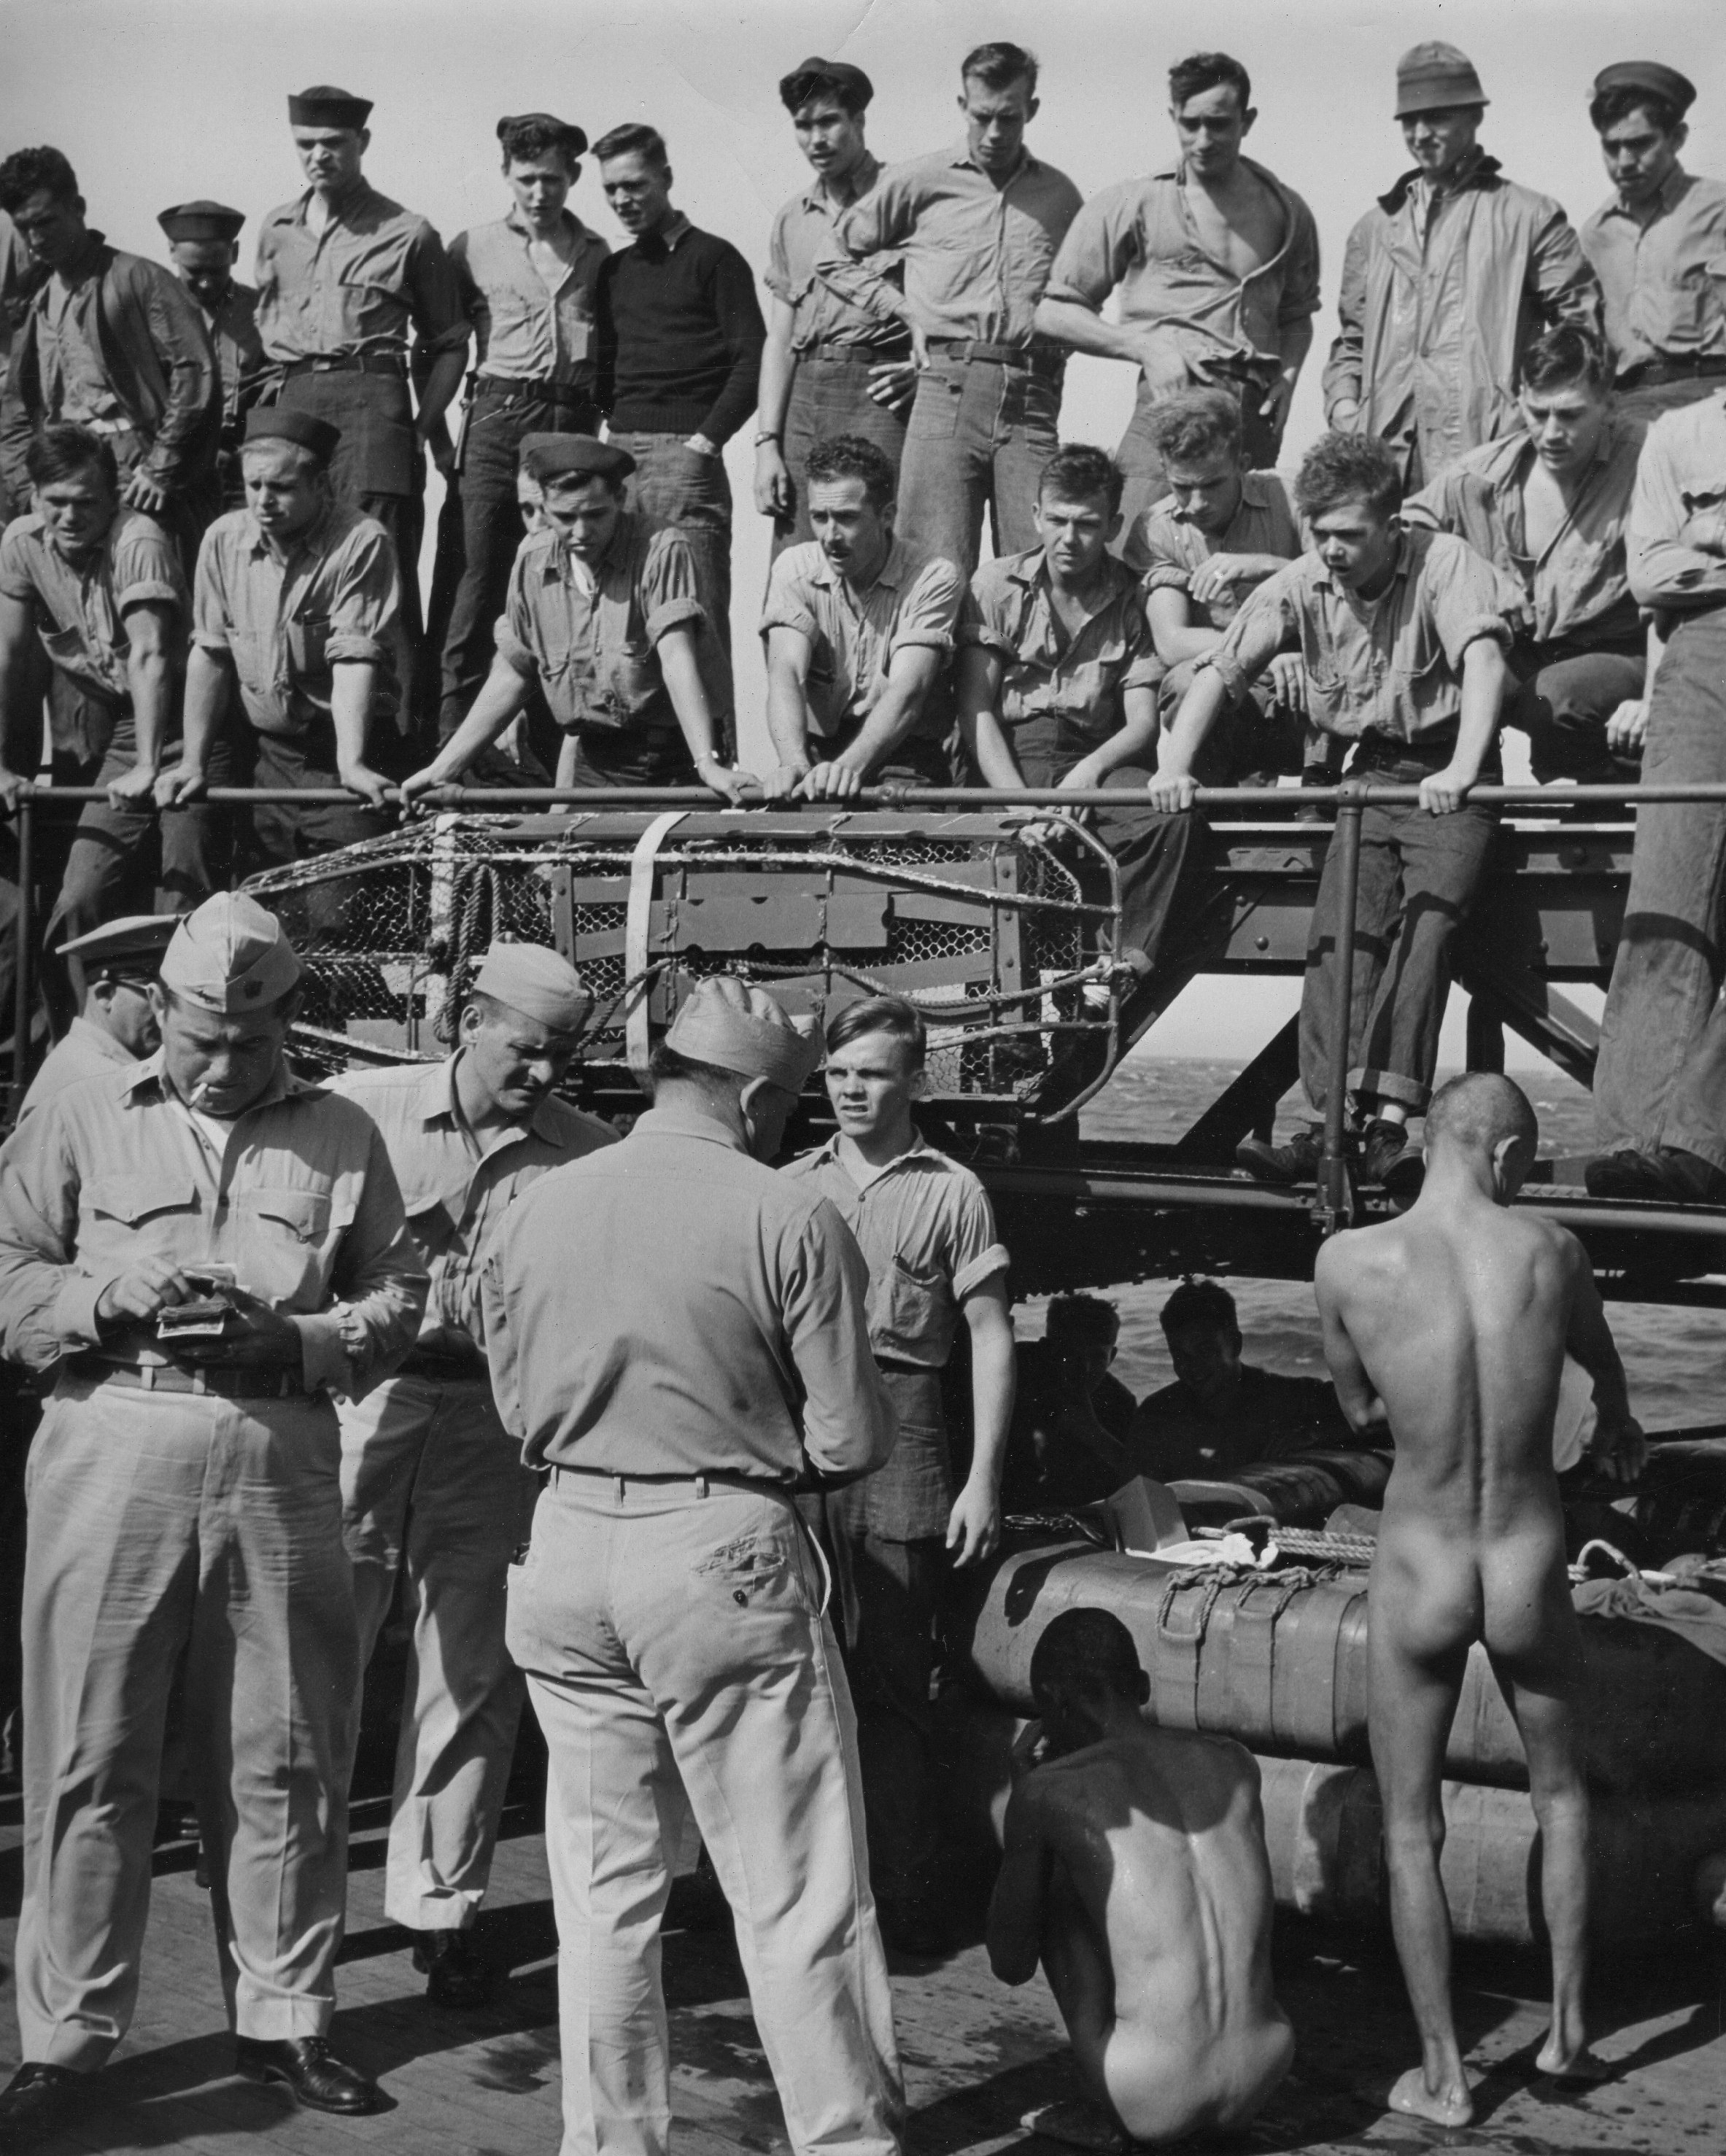 Public humiliation of Japanese prisoners of war aboard USS New Jersey, Dec 1944, photo 1 of 6